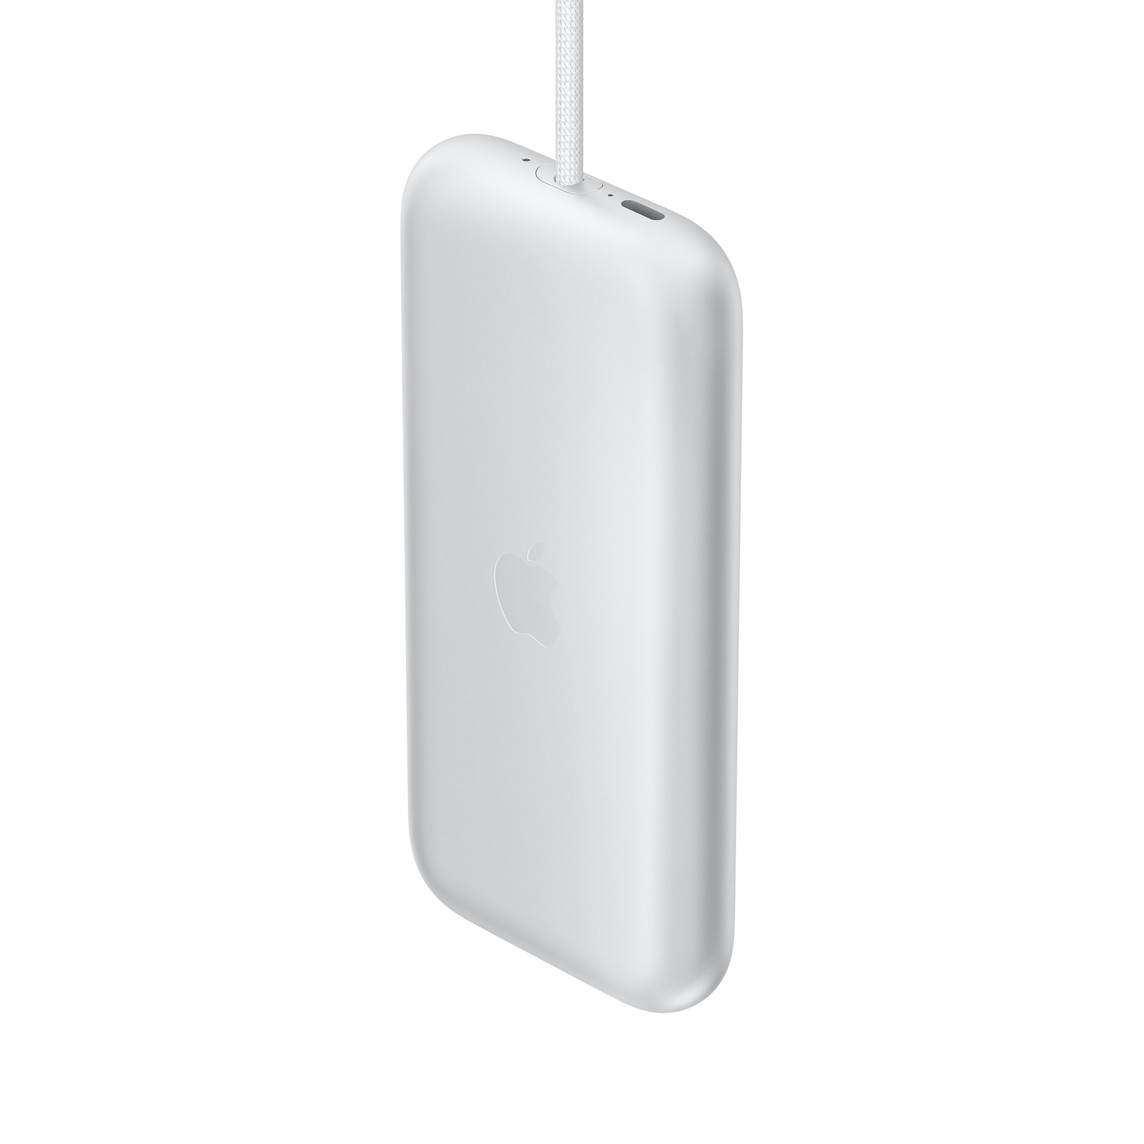 Apple Vision Pro Battery with Apple Logo, rectangular shape, rounded corners, straight sides, LED indicators next to the built-in cable and USB-C port